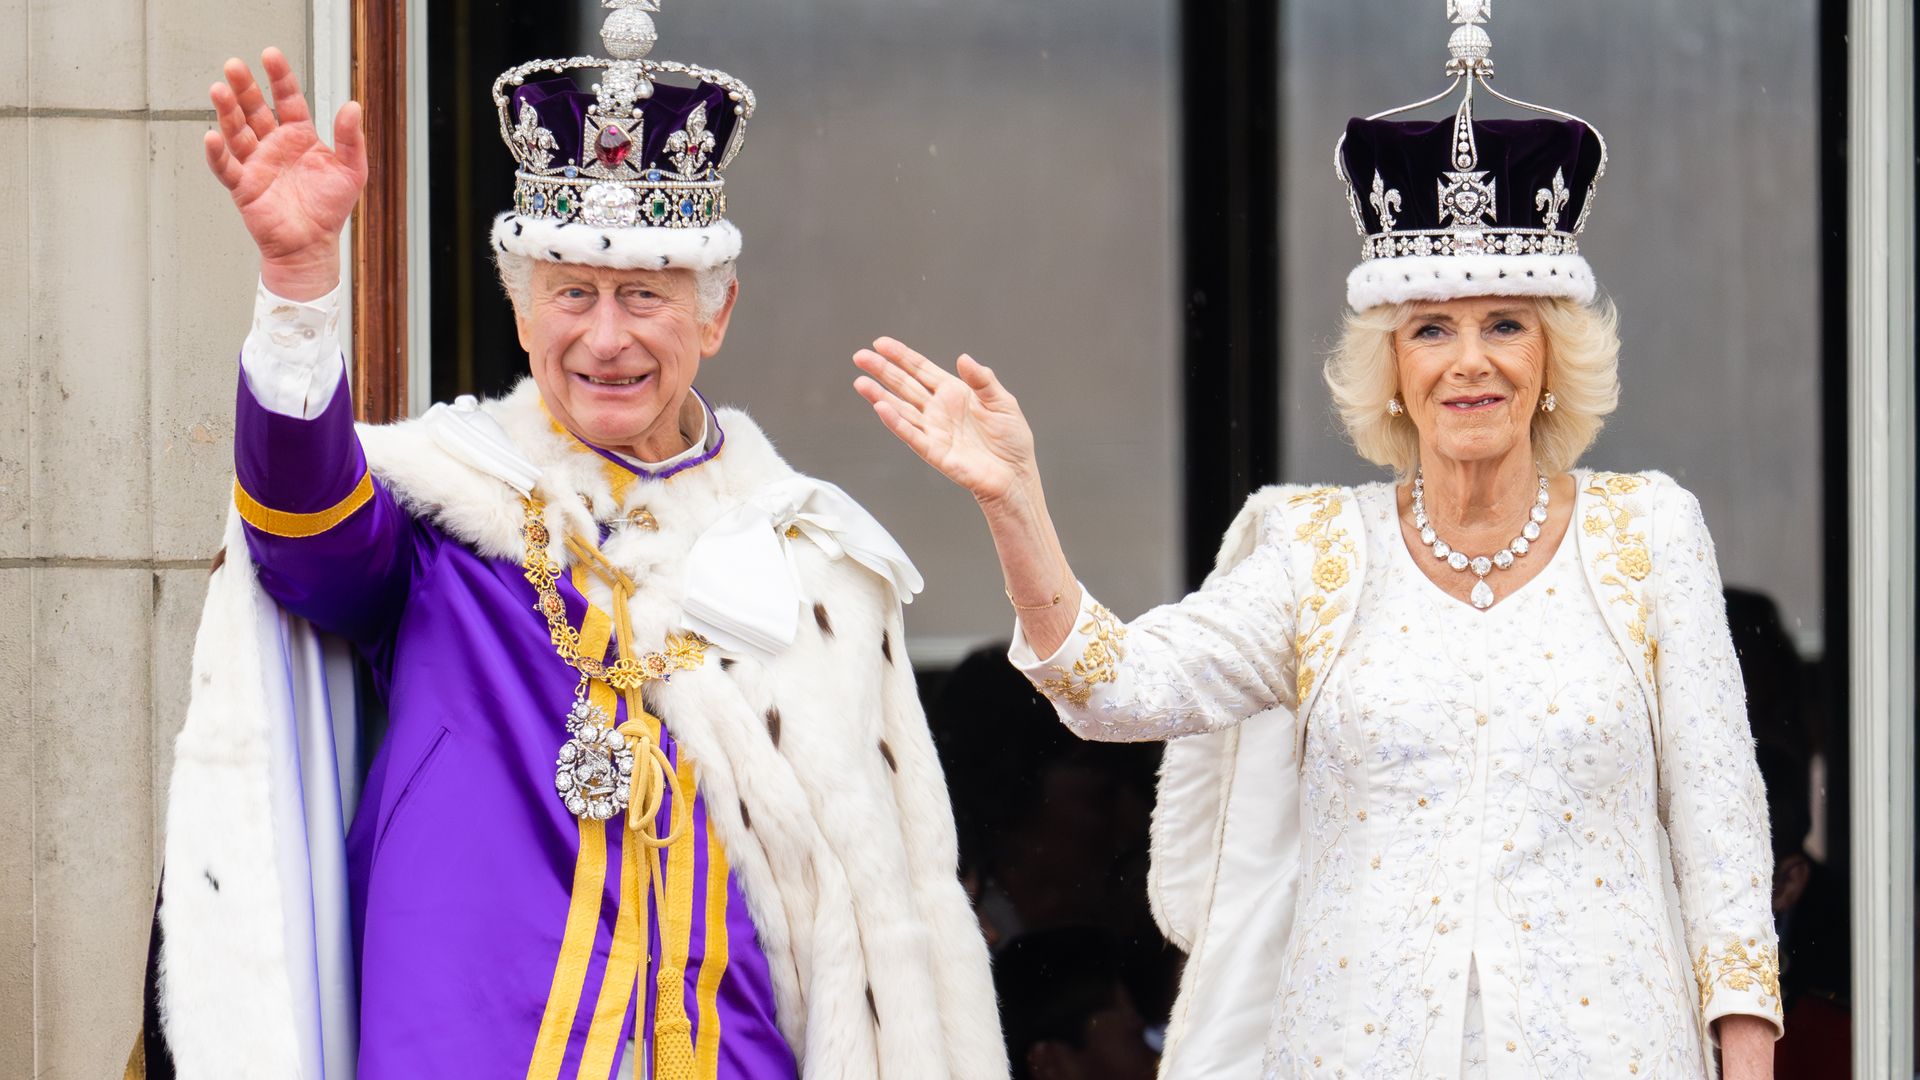 Their Majesties King Charles III And Queen Camilla on Coronation Day